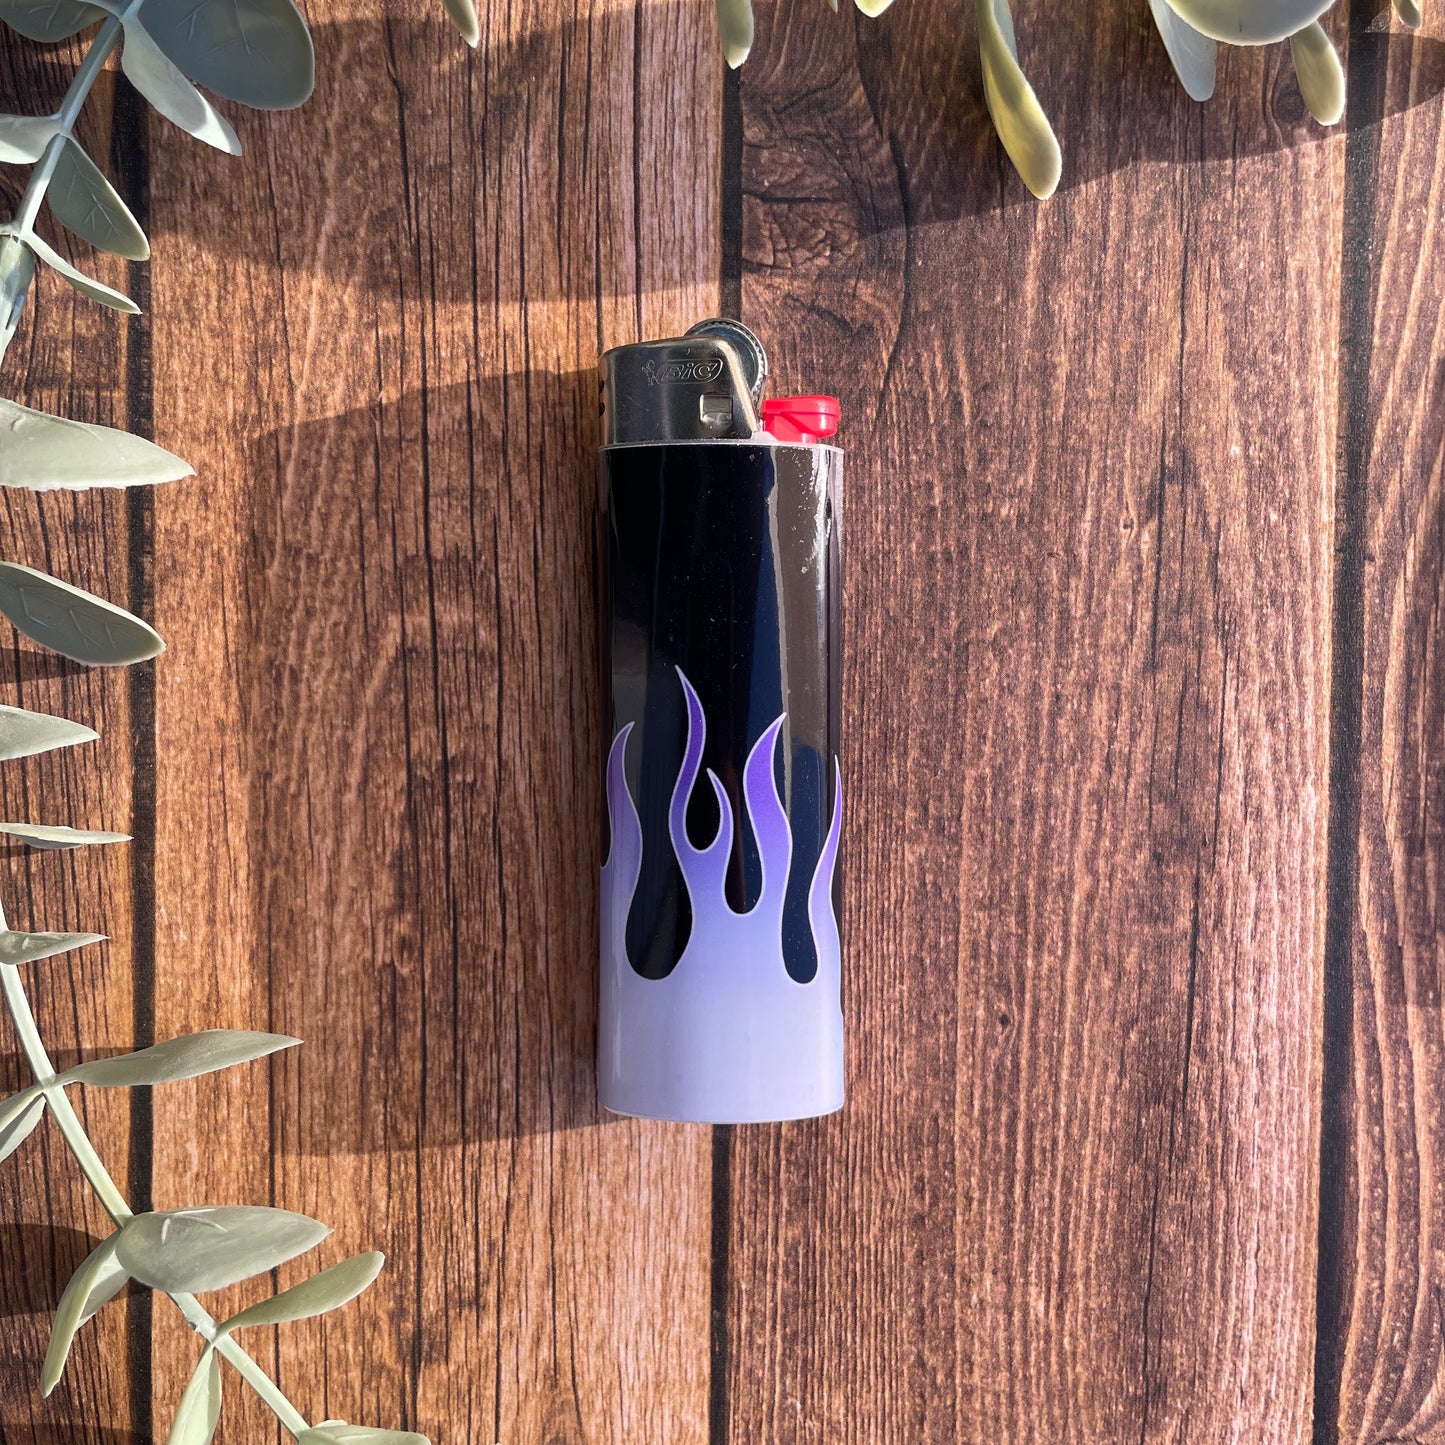 Twin flame lighters